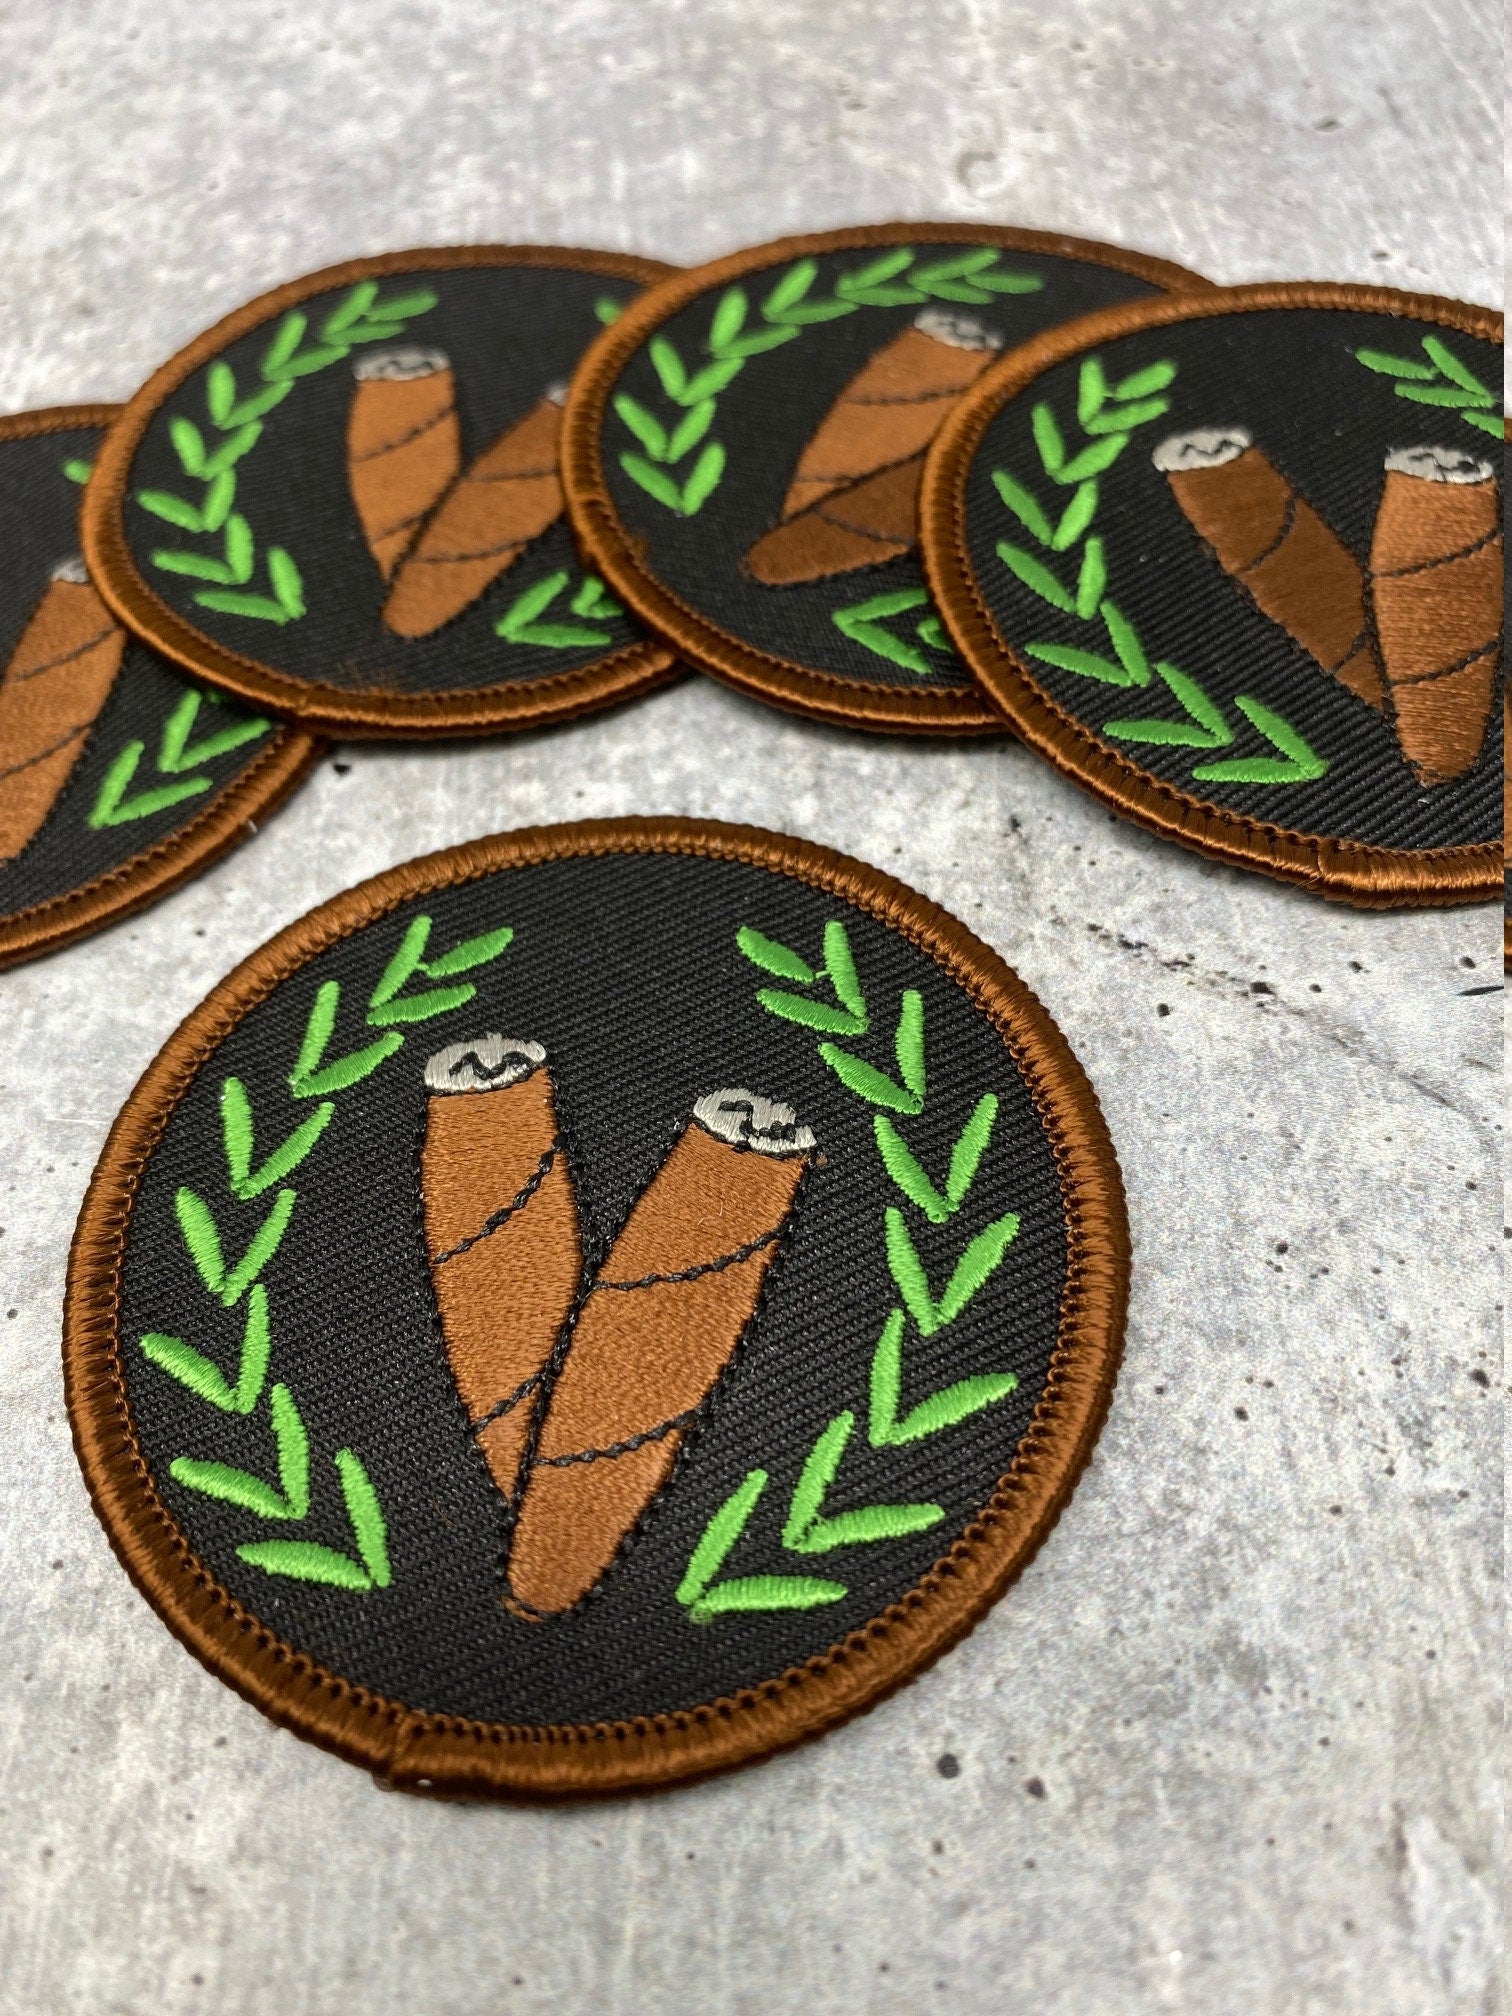 Cigar Lovers,"Cigar Badge" 1-pc, Smokers Gift, Cool Embroidered Patch, Circular, Size 3',  Iron-on, Patches for Men